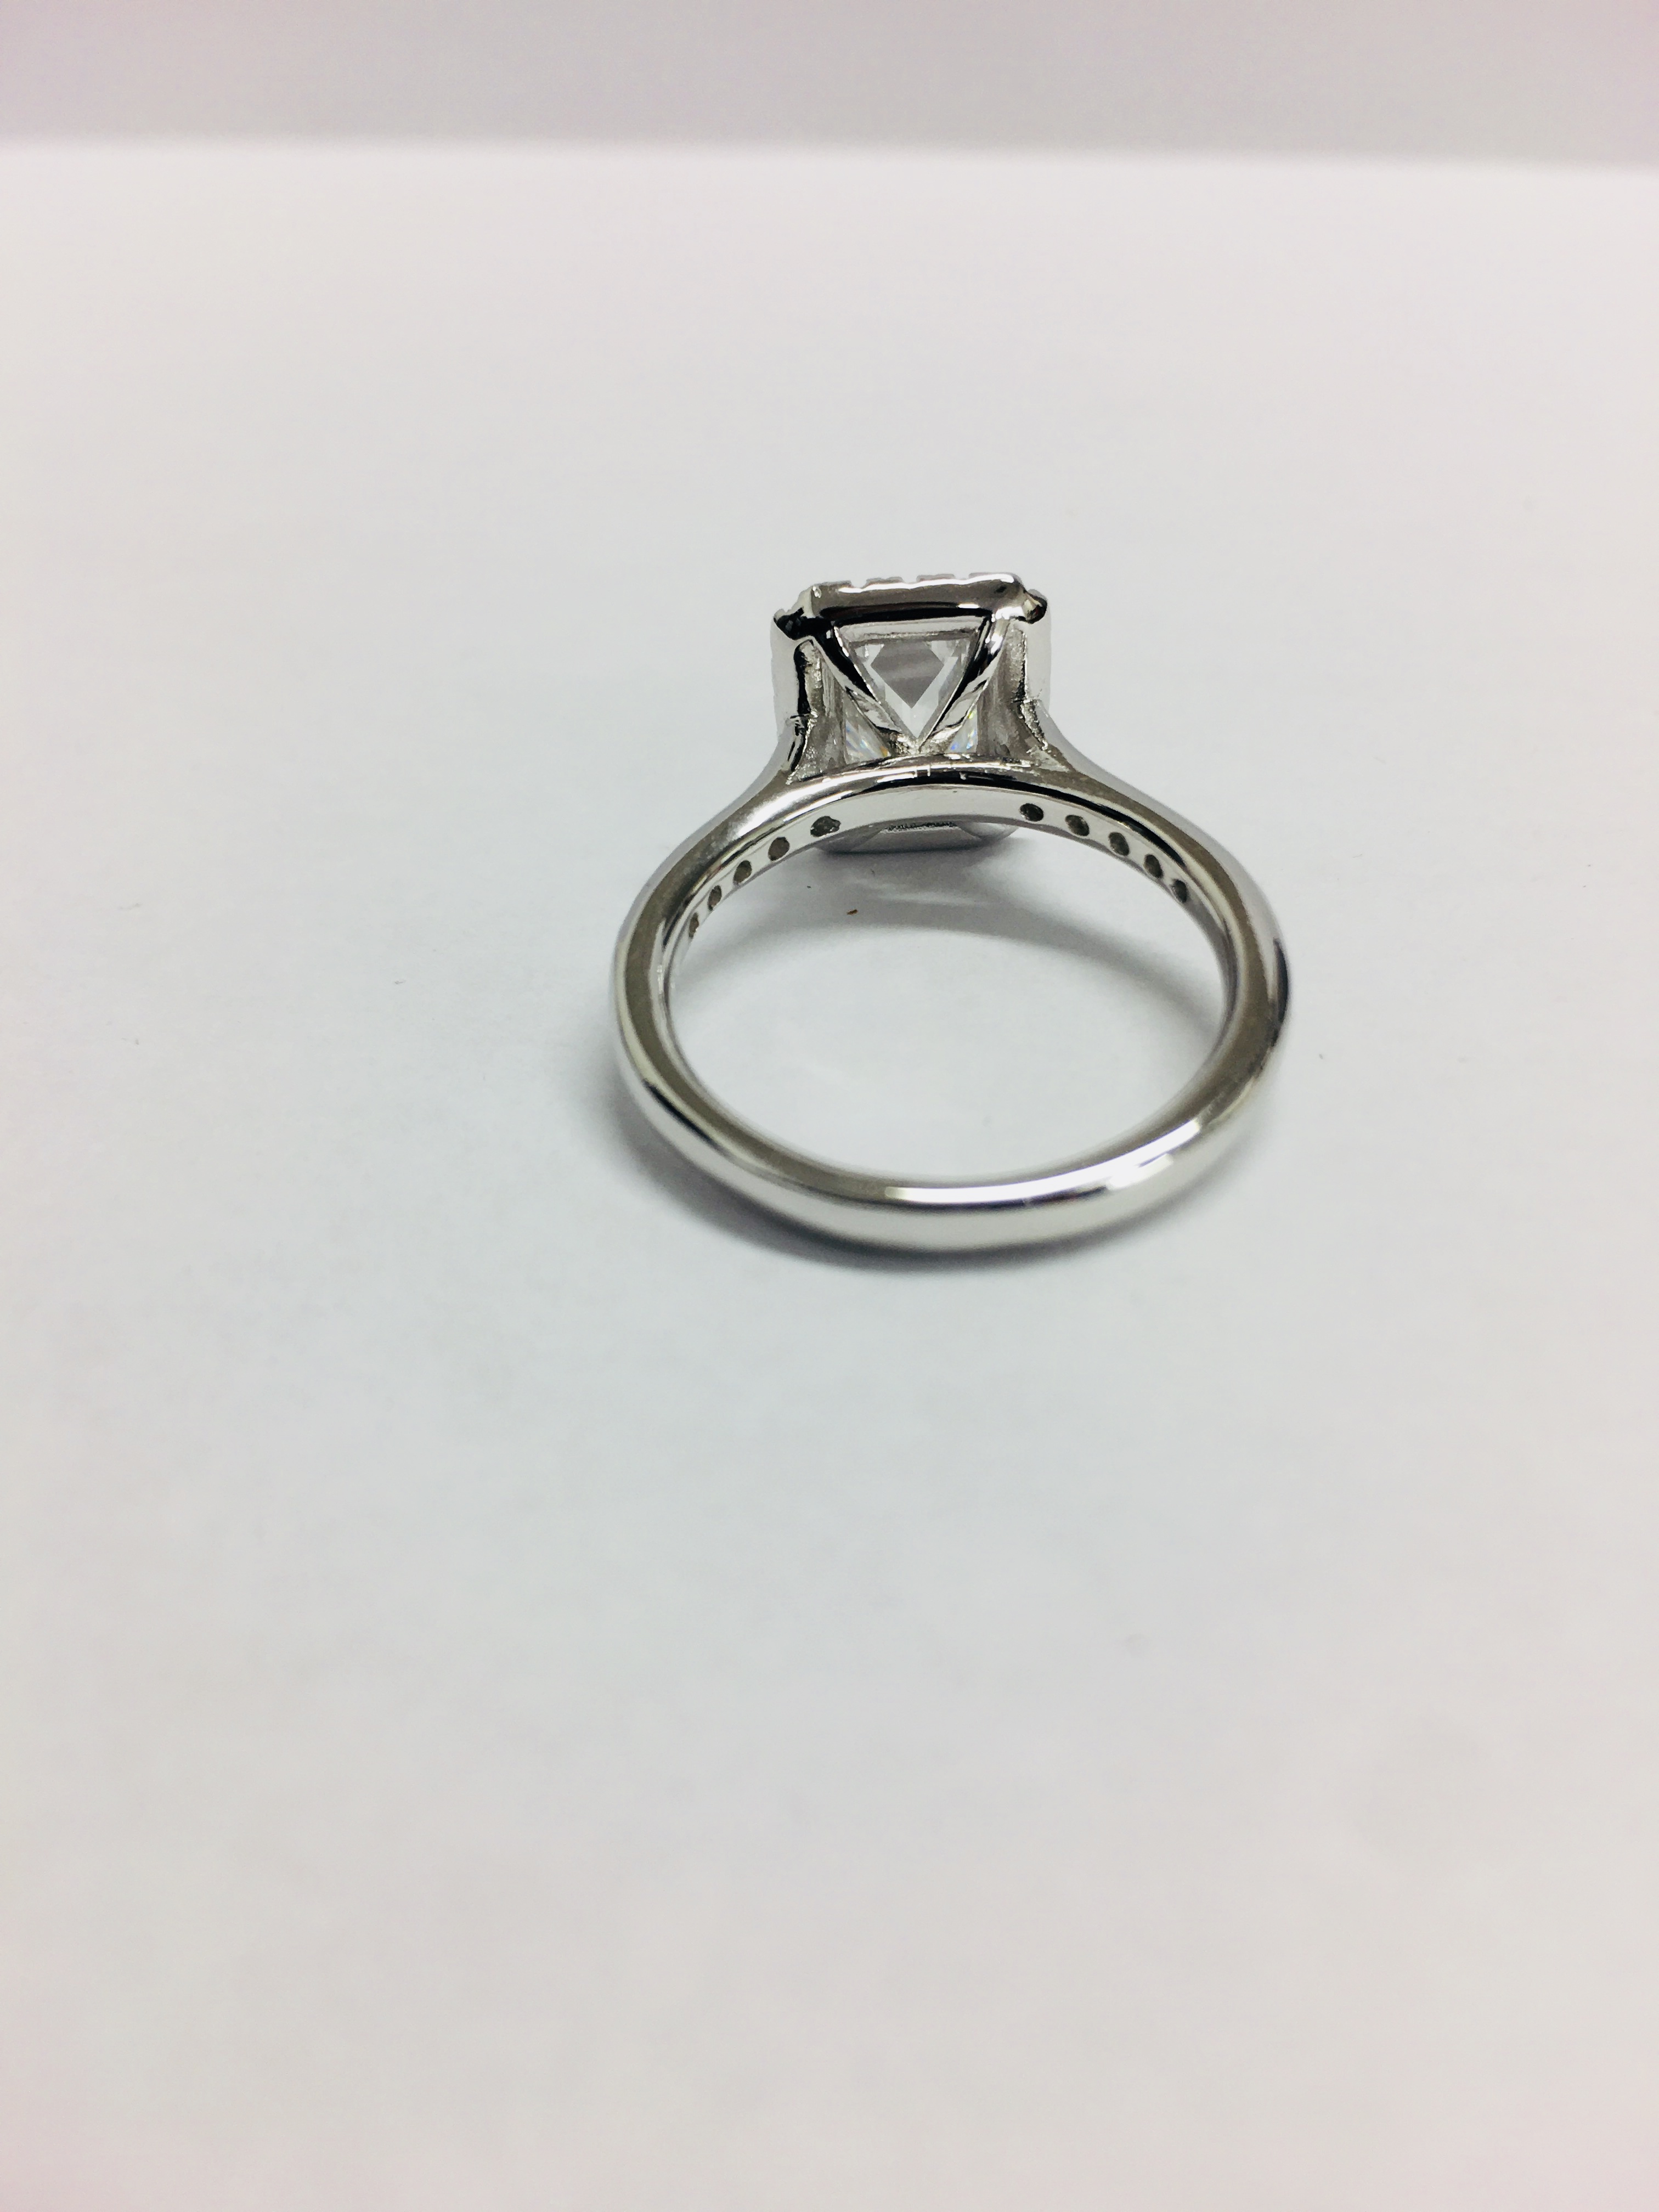 1.2ct diamond solitaire ring set with an emerald cut diamond - Image 5 of 8